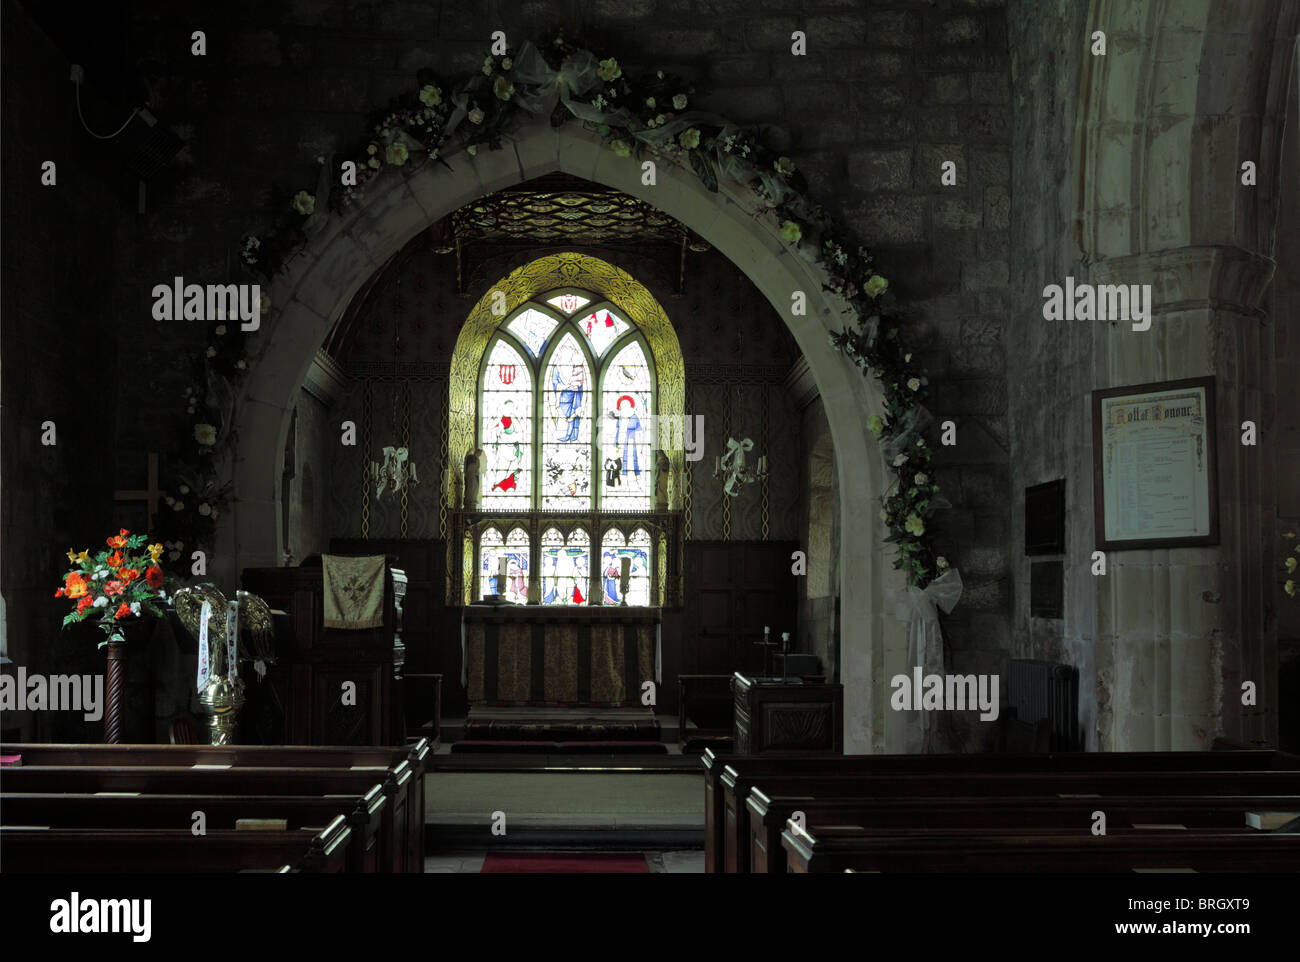 Internal features and artefact which relate to St Bartholemews Church in Moreton Corbet, Shropshire, England. Stock Photo